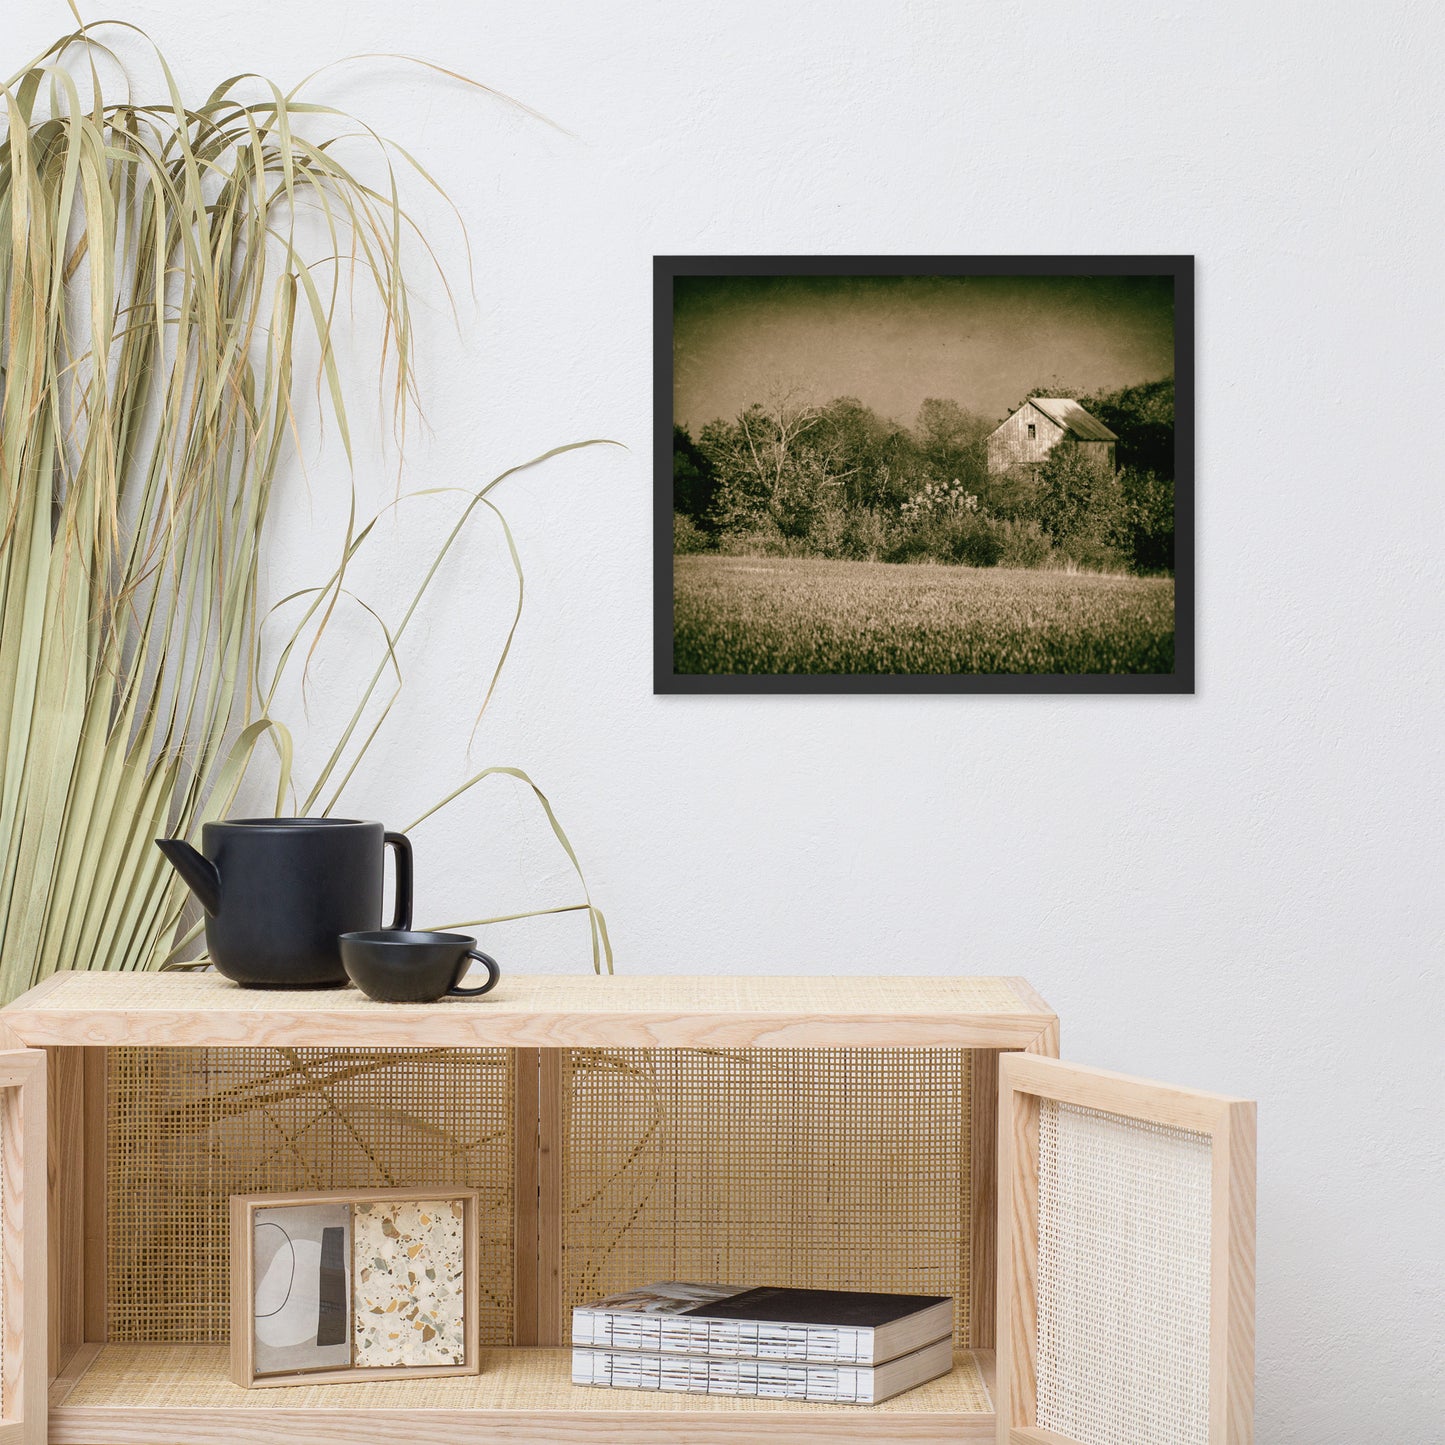 Modern Rustic Wall Decor: Abandoned Barn In The Trees - Rural / Rustic / Farmhouse Style / Landscape / Nature Vintage Framed Photo Paper Prints - Artwork - Wall Decor